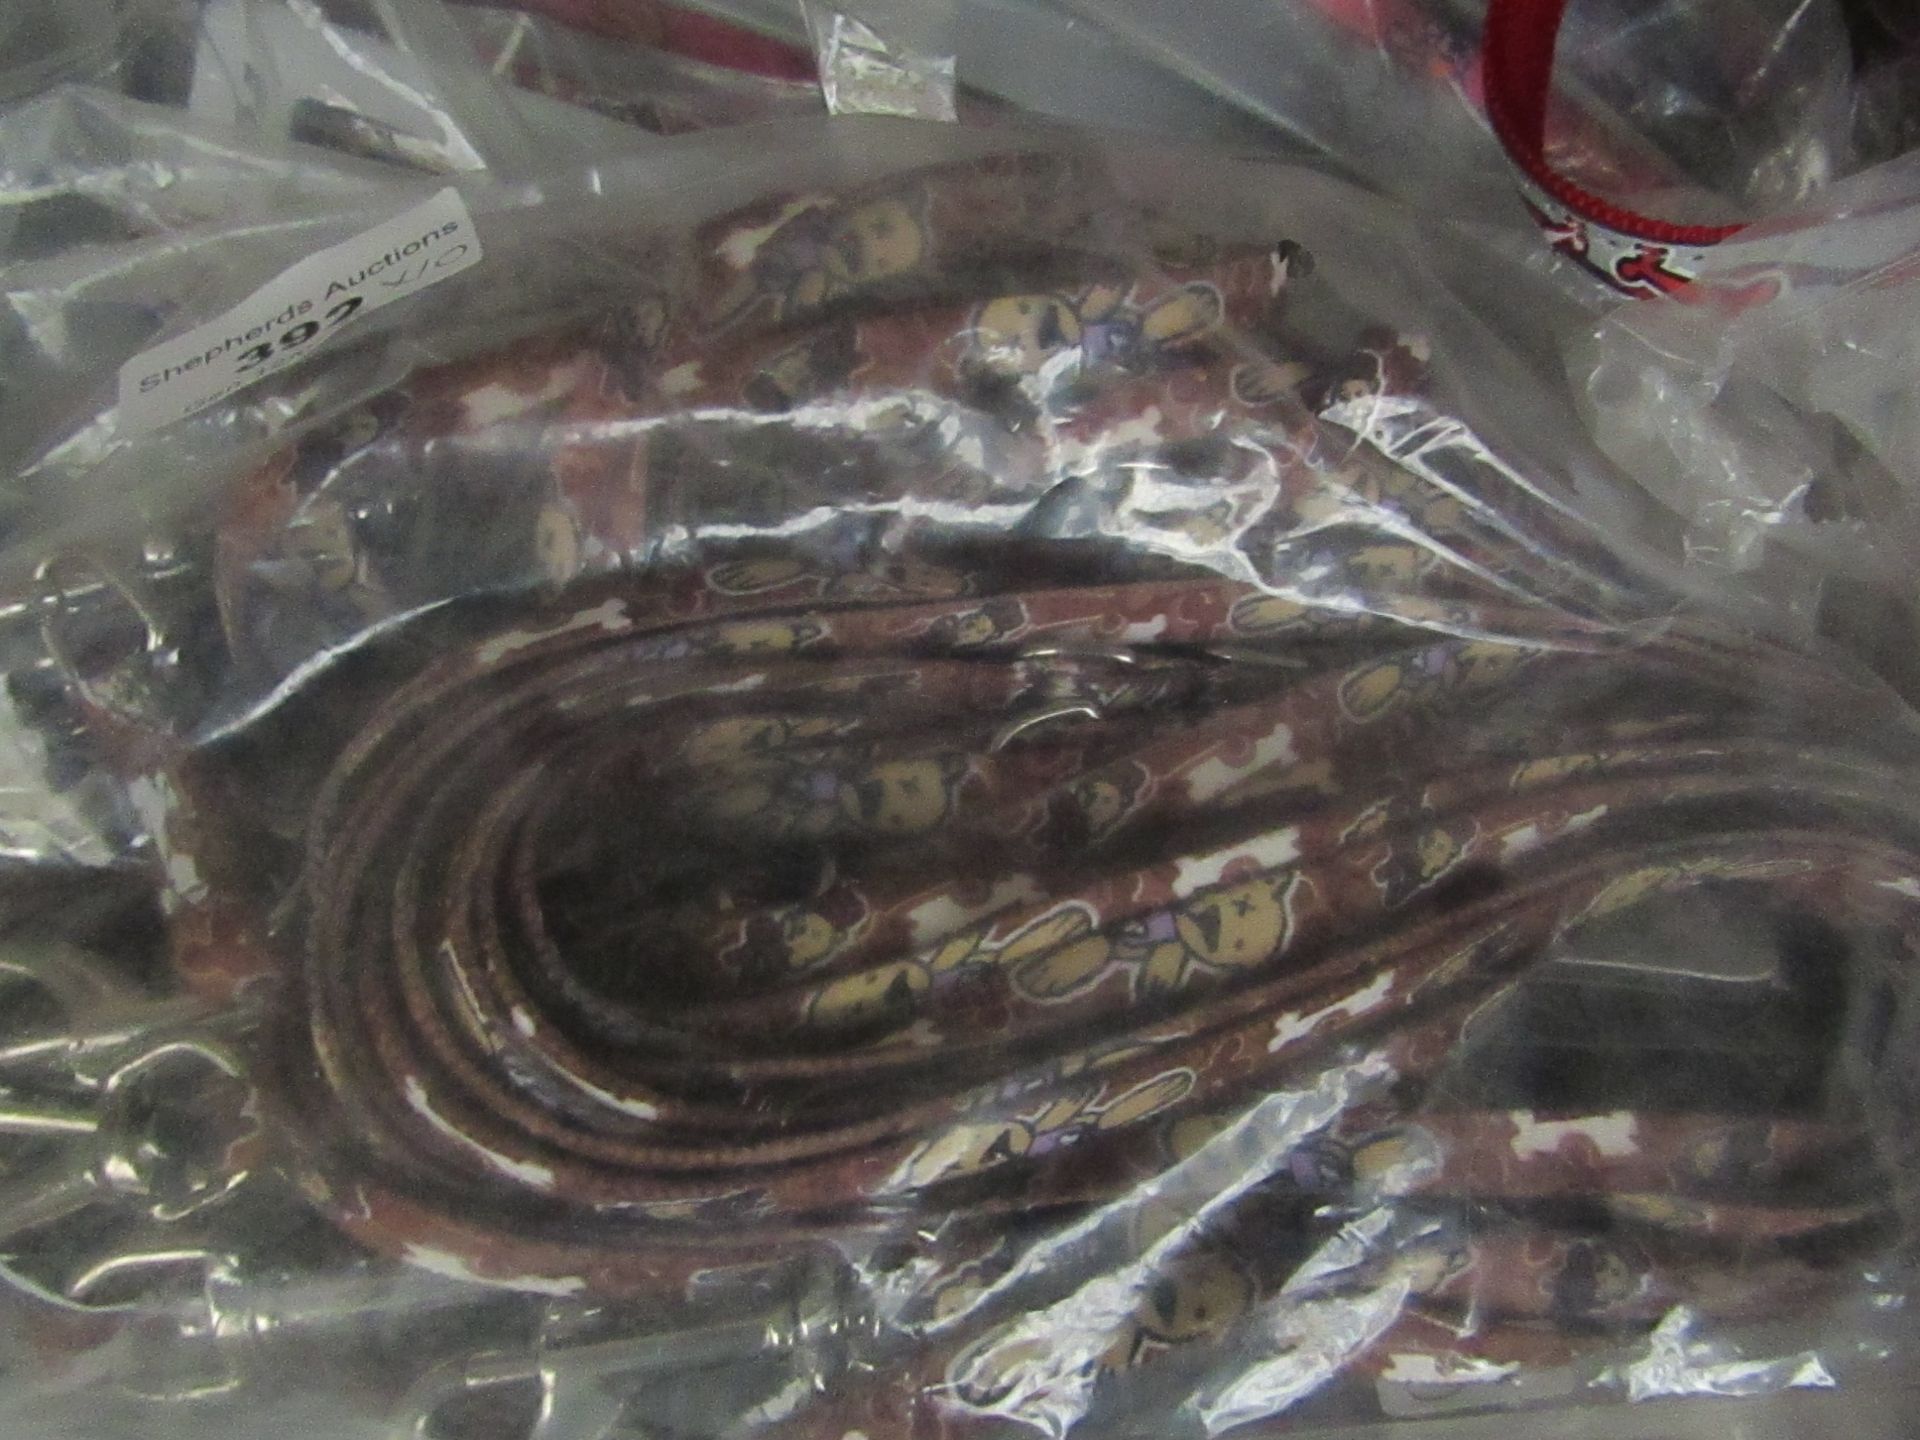 10x 1.1m Dog leads, new. - Image 2 of 2